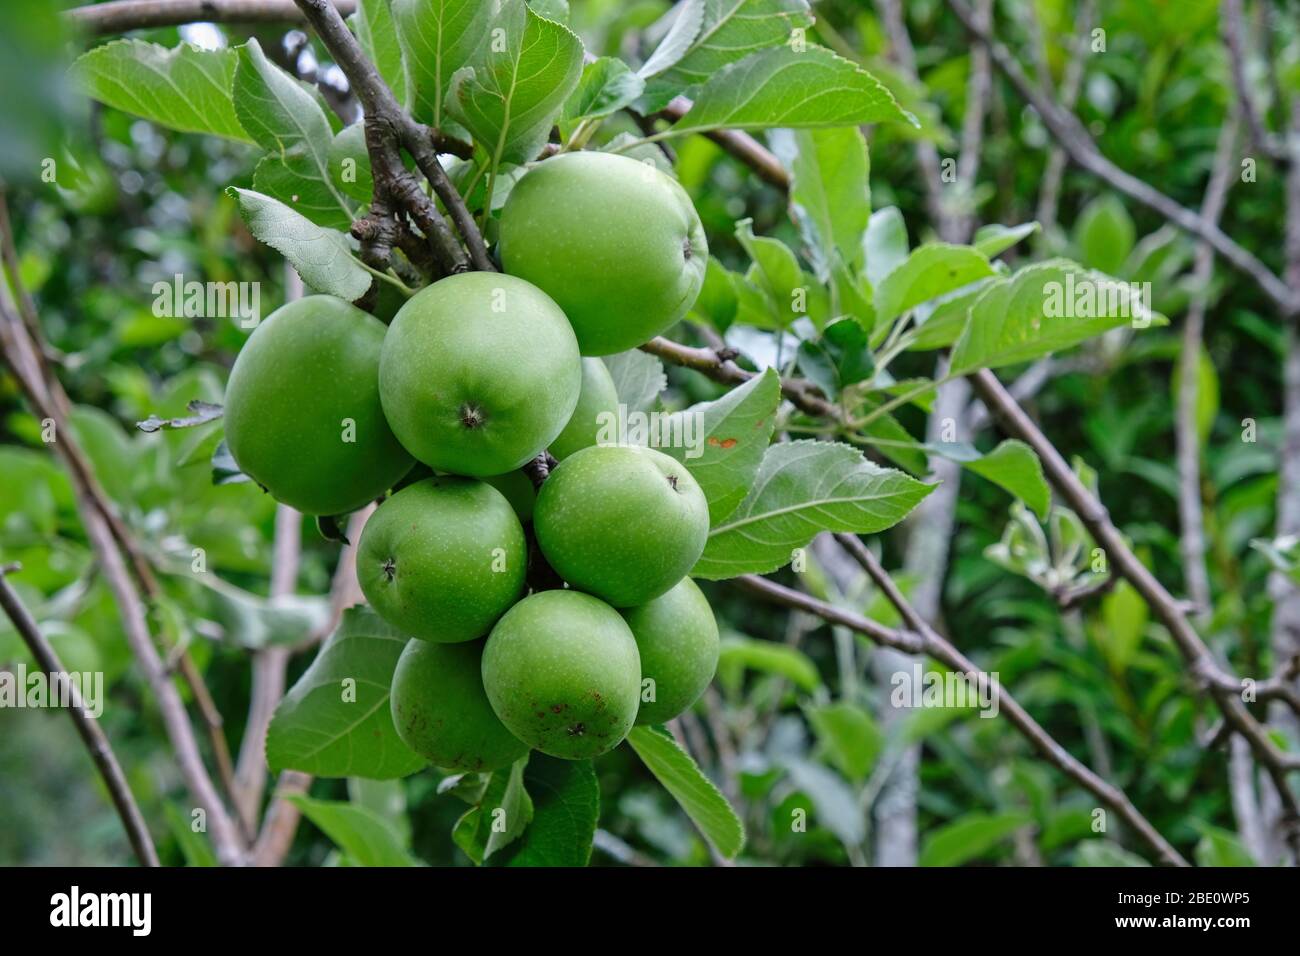 Apple tree with cluster of young developing green apples. Stock Photo